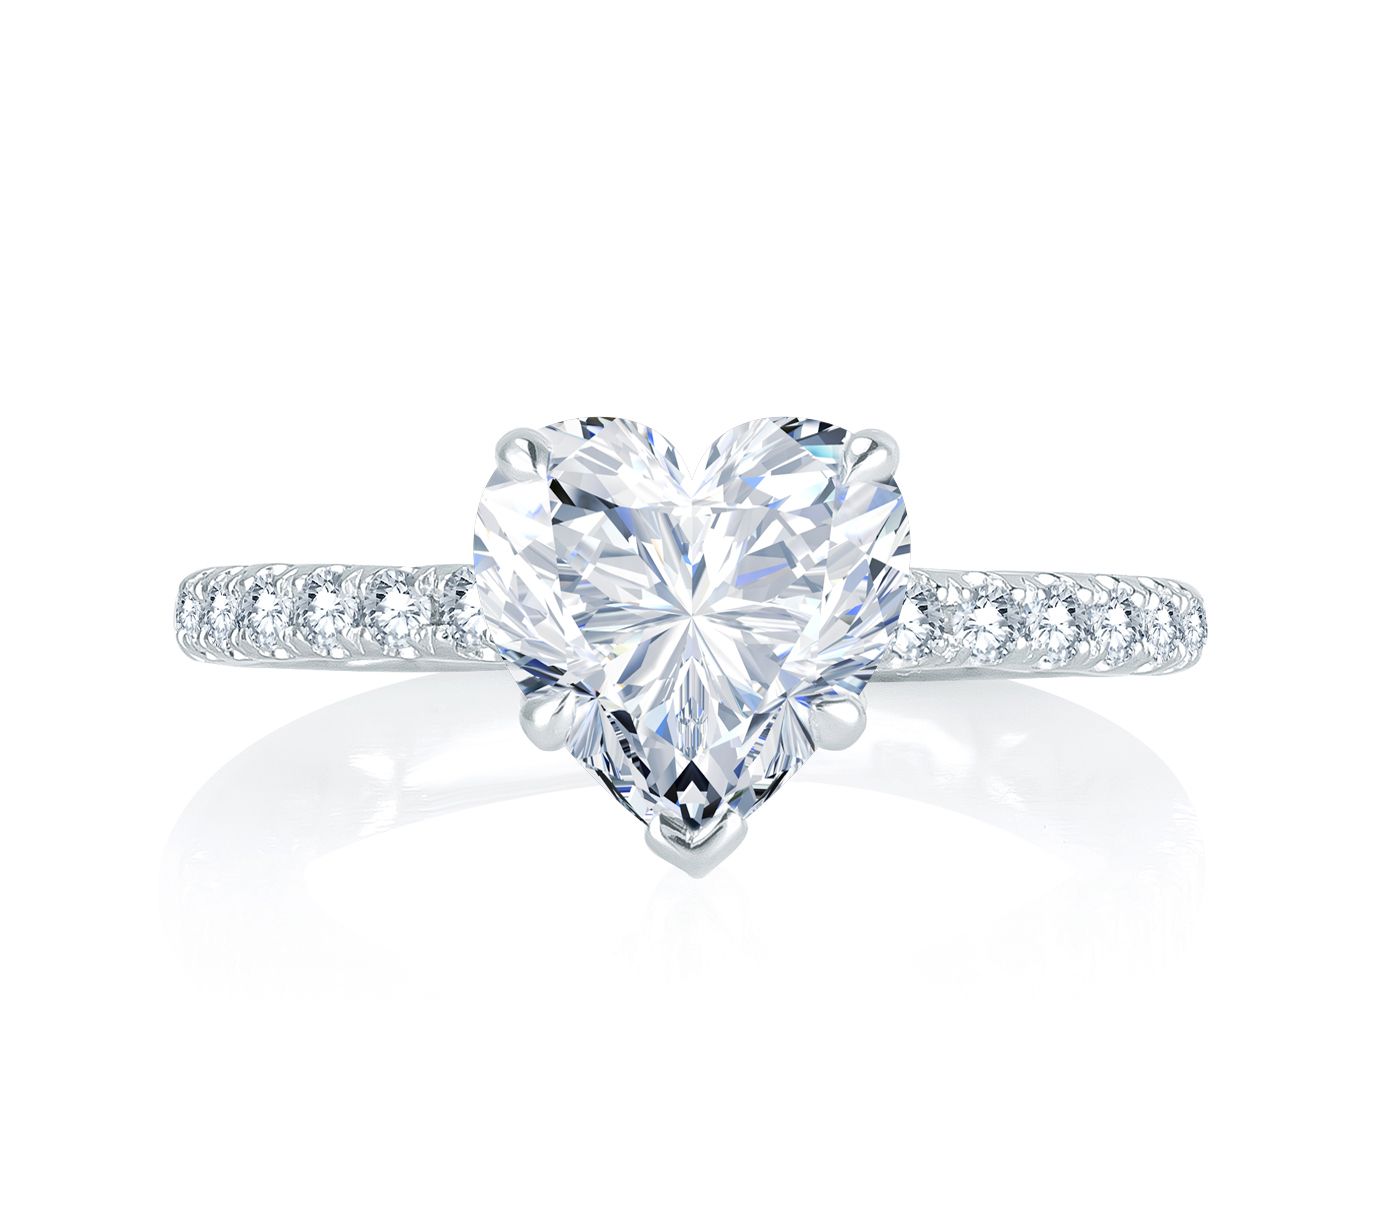 An Ode To True Love. Charming French Pave Setting Quilted Engagement Ring